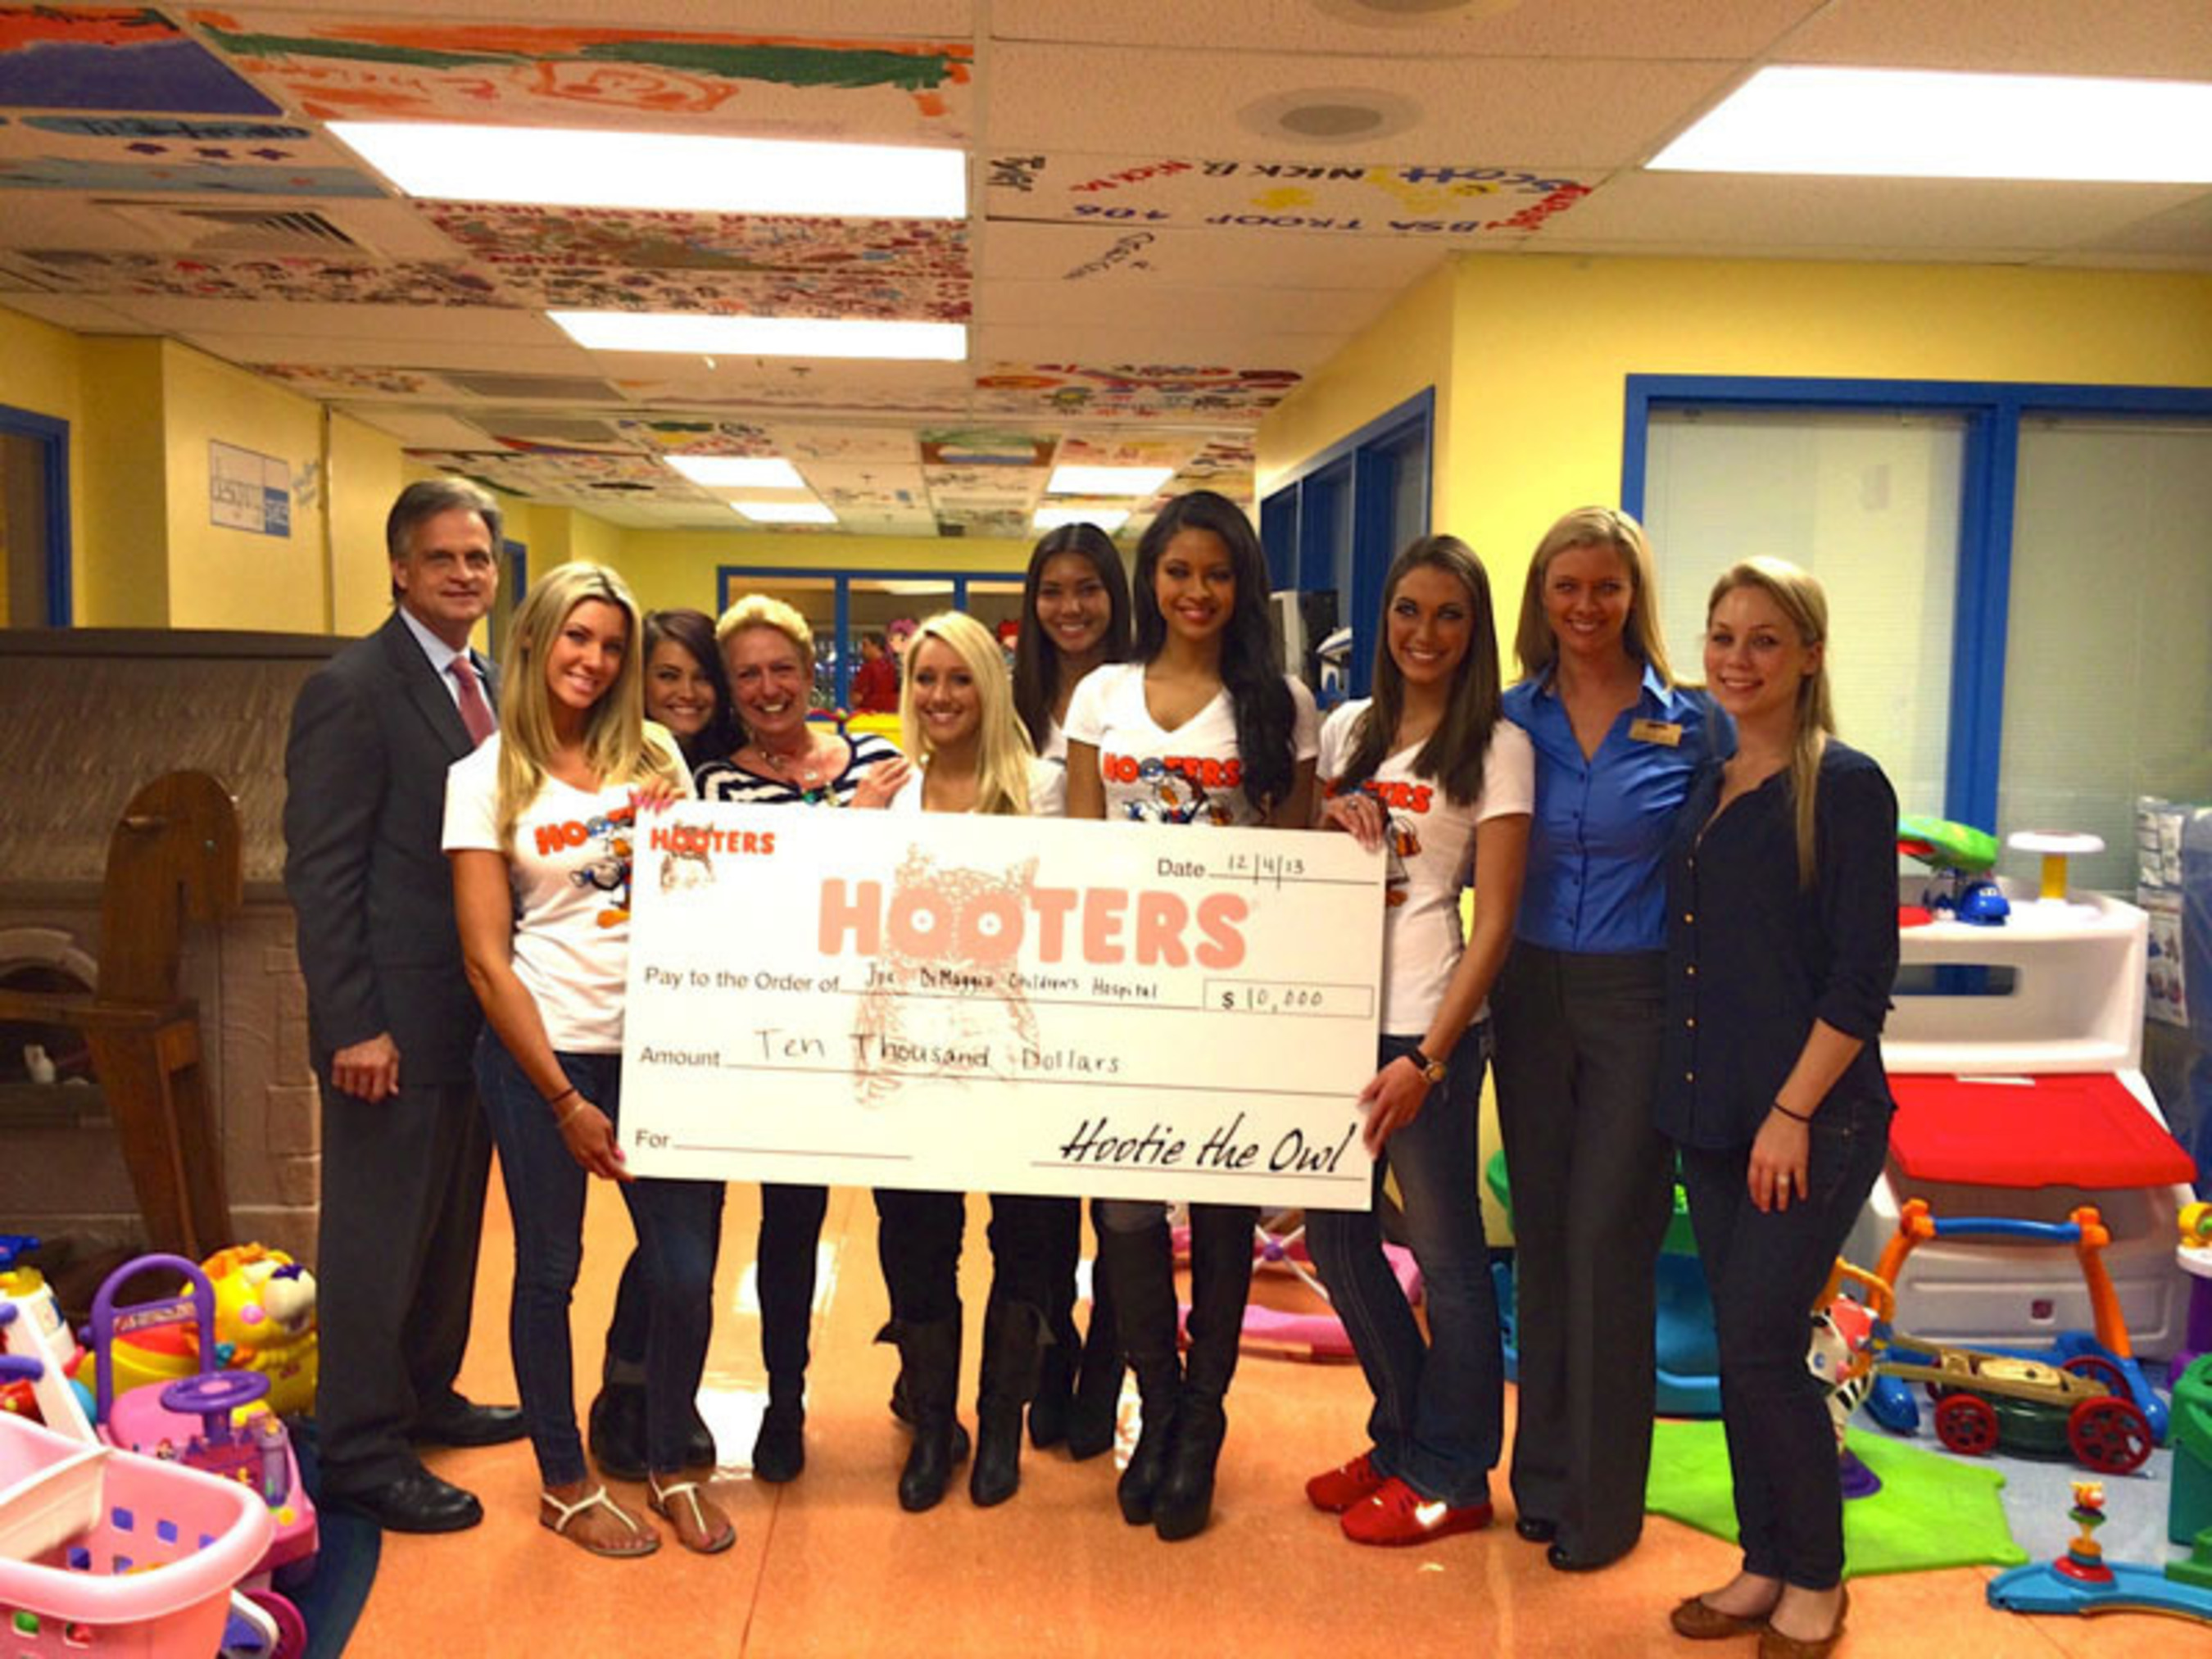 Hooters of South Florida Makes a $10,000 donation to the Joe DiMaagio Children's Hospital. From Left to Right: Kevin Janser, Jenn Burkell, Ashley Tice, Karen Renzer, Kendall Lanese, Kathy Diehl, Marissa Raisor, Alyssa Wickman, Krisit Quarles and Lauren Haywood. (PRNewsFoto/Hooters of South Florida) (PRNewsFoto/HOOTERS OF SOUTH FLORIDA)